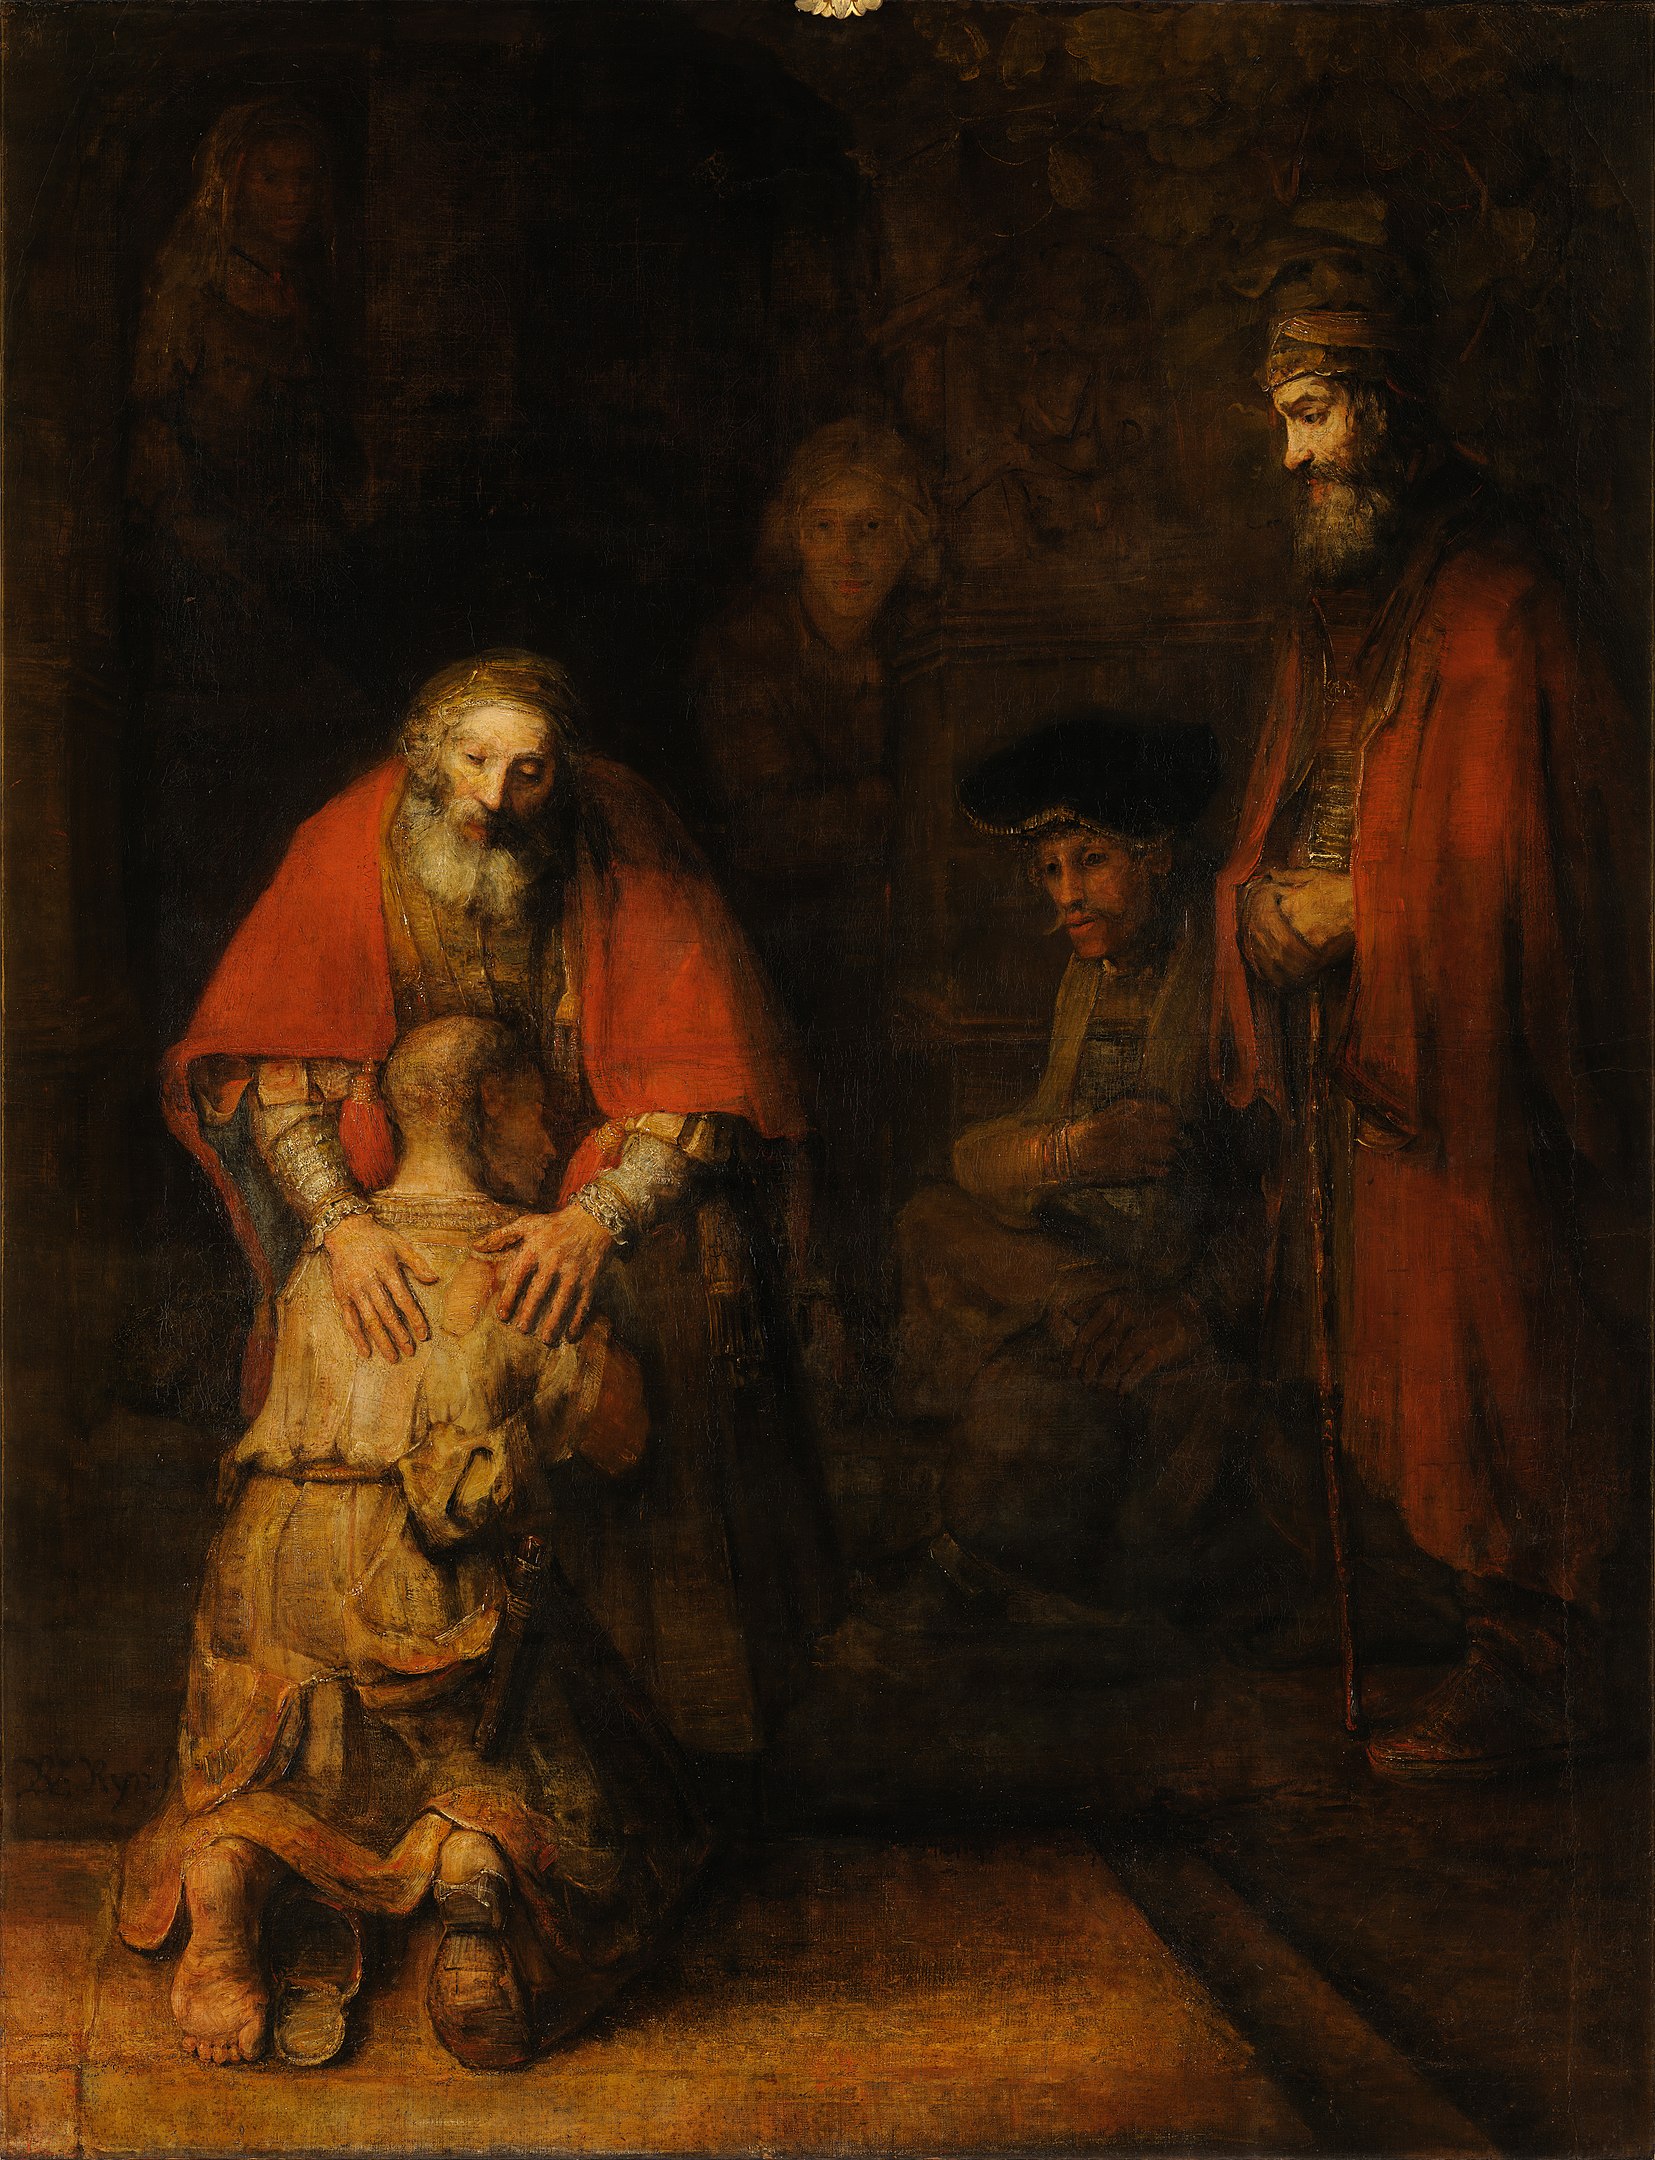 A man kneeling on both knees is held warmly by another, with three others watching nearby